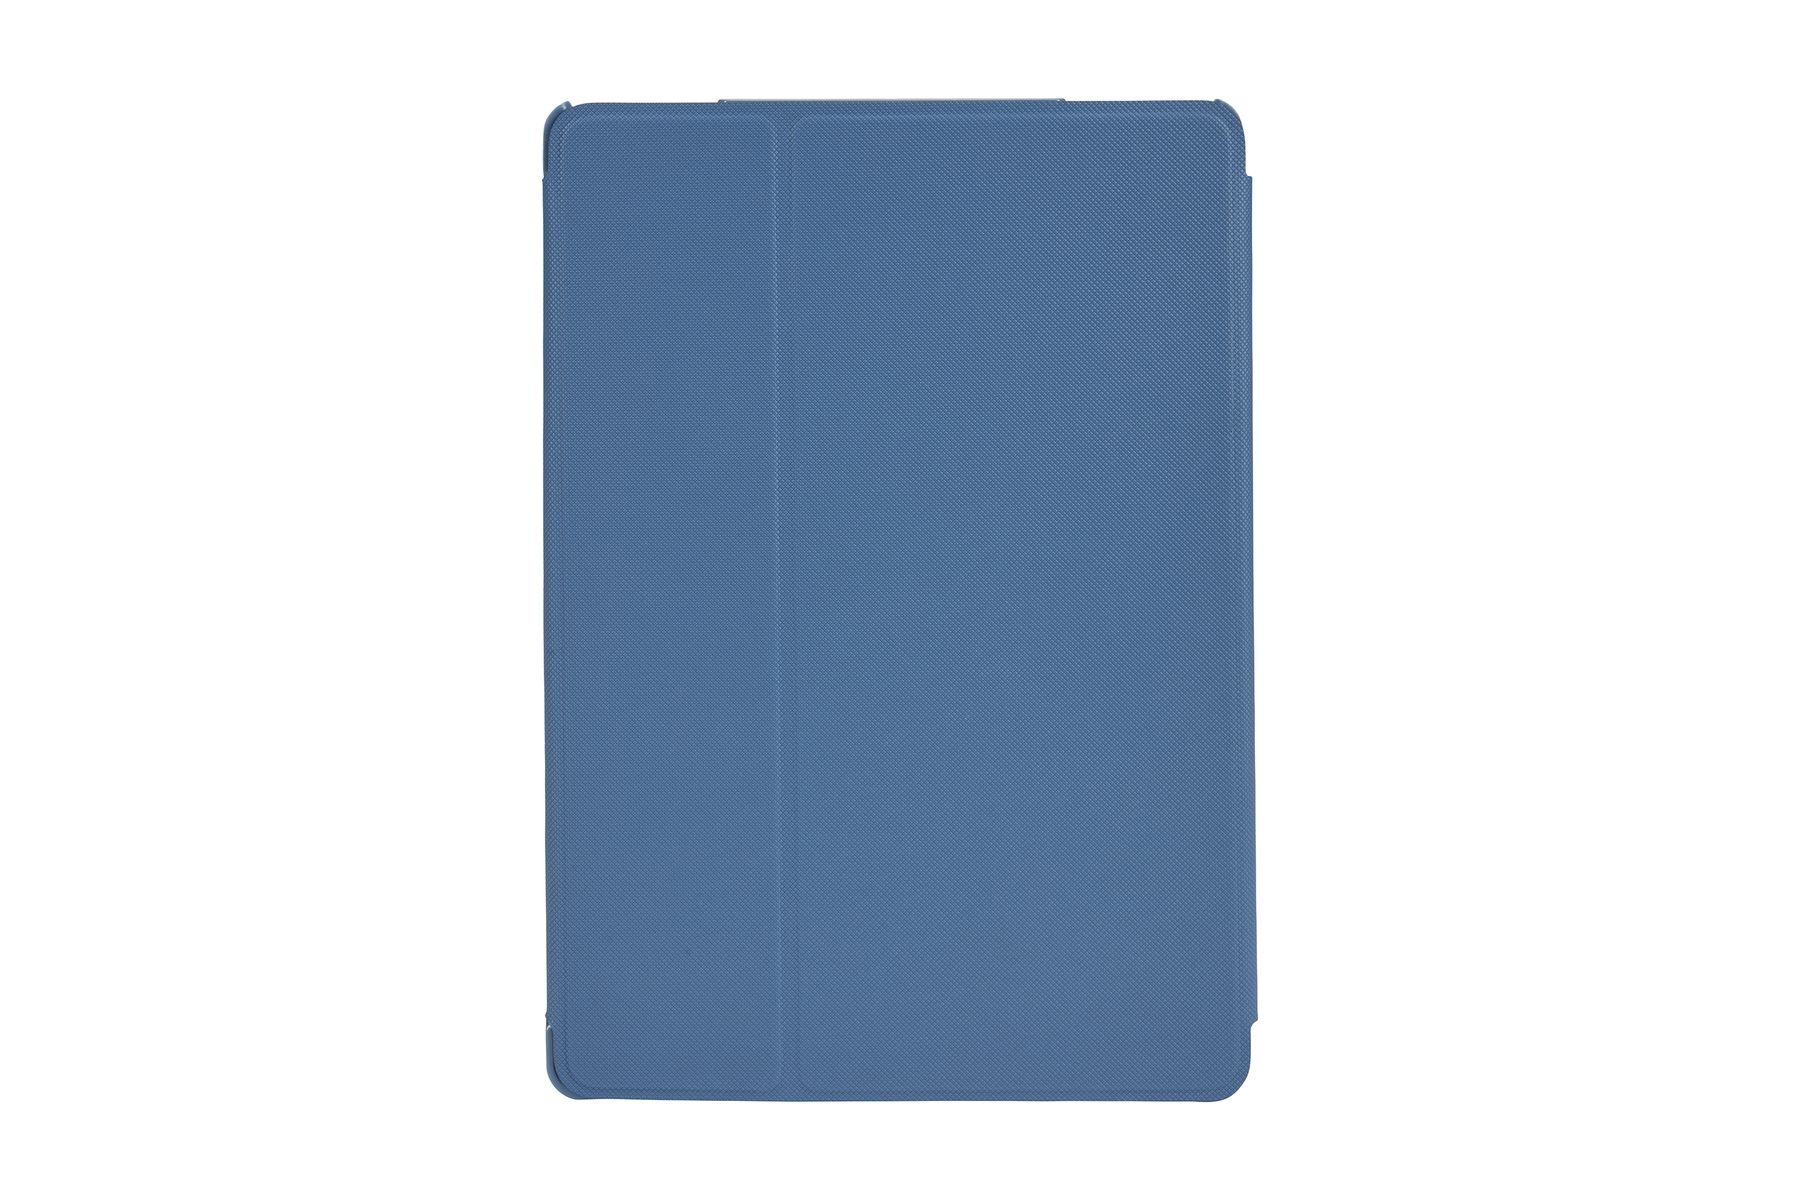 Snapview case for 10.1" iPad